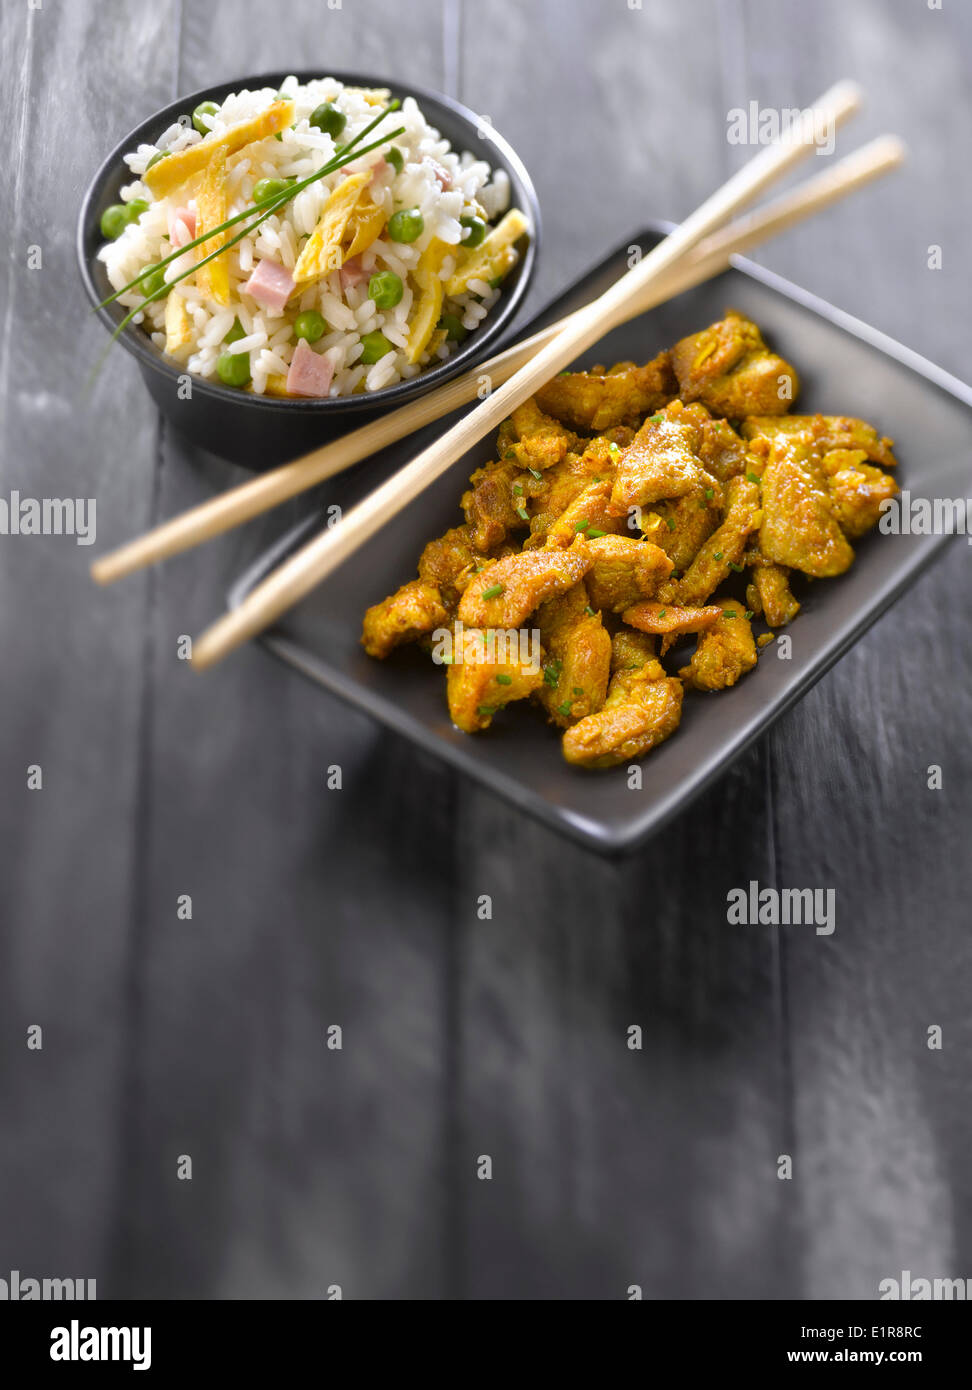 Curried pork with Cantonese rice Stock Photo